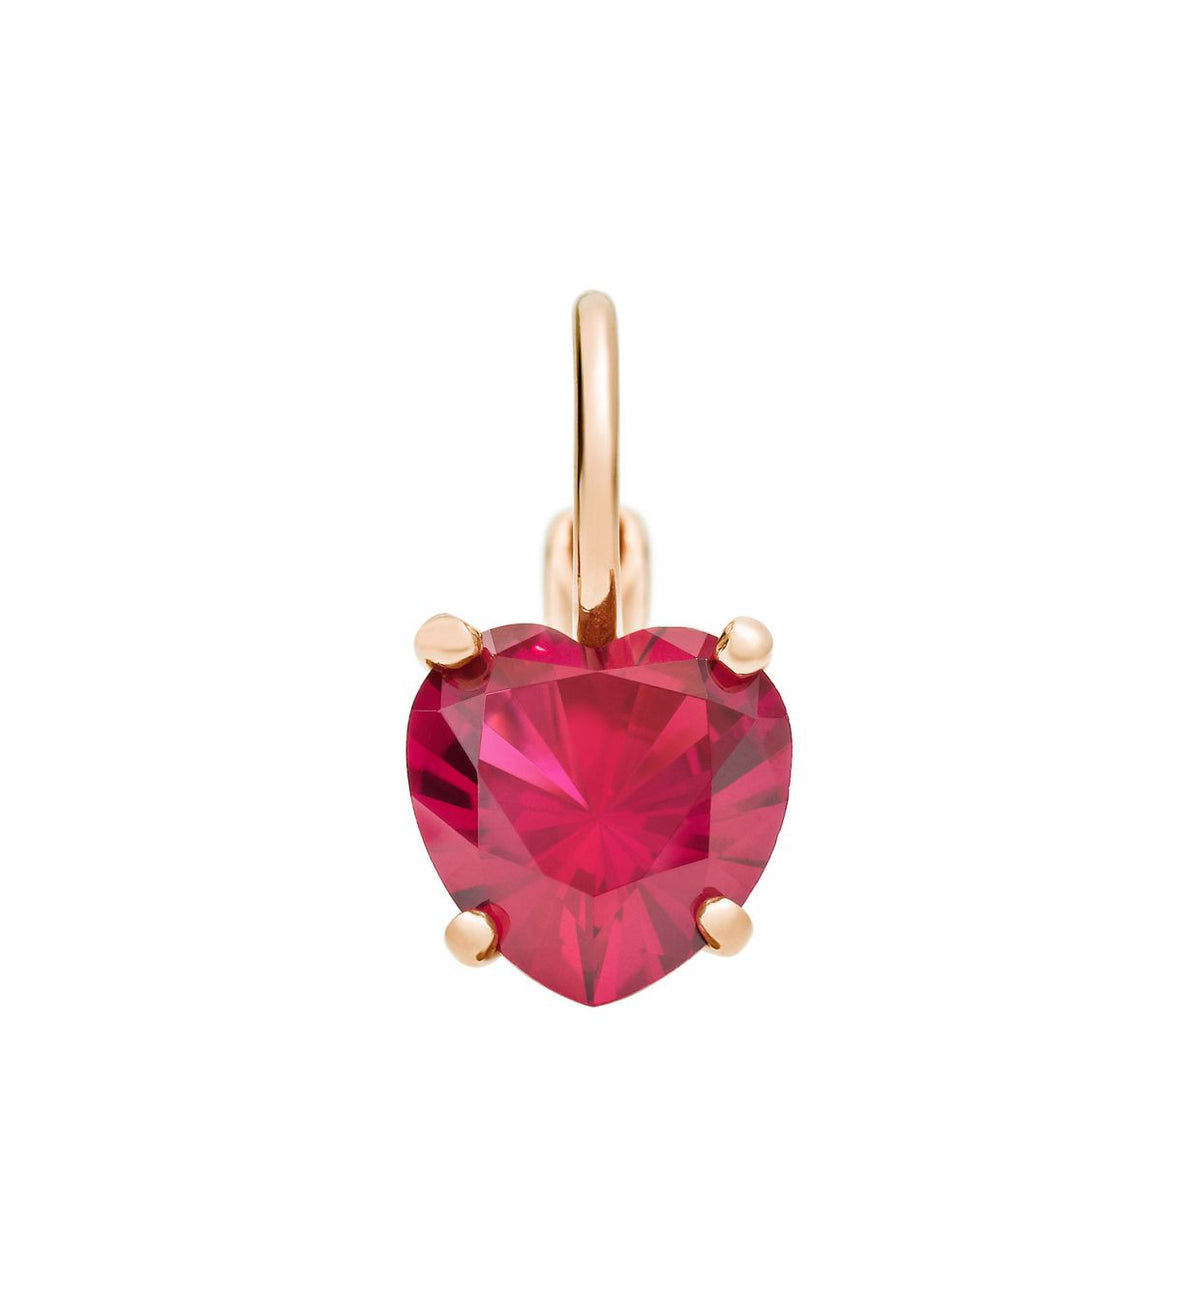 DoDo 100% Amore Earrings in 9k Rose Gold with Synthetic Ruby - Orsini Jewellers NZ